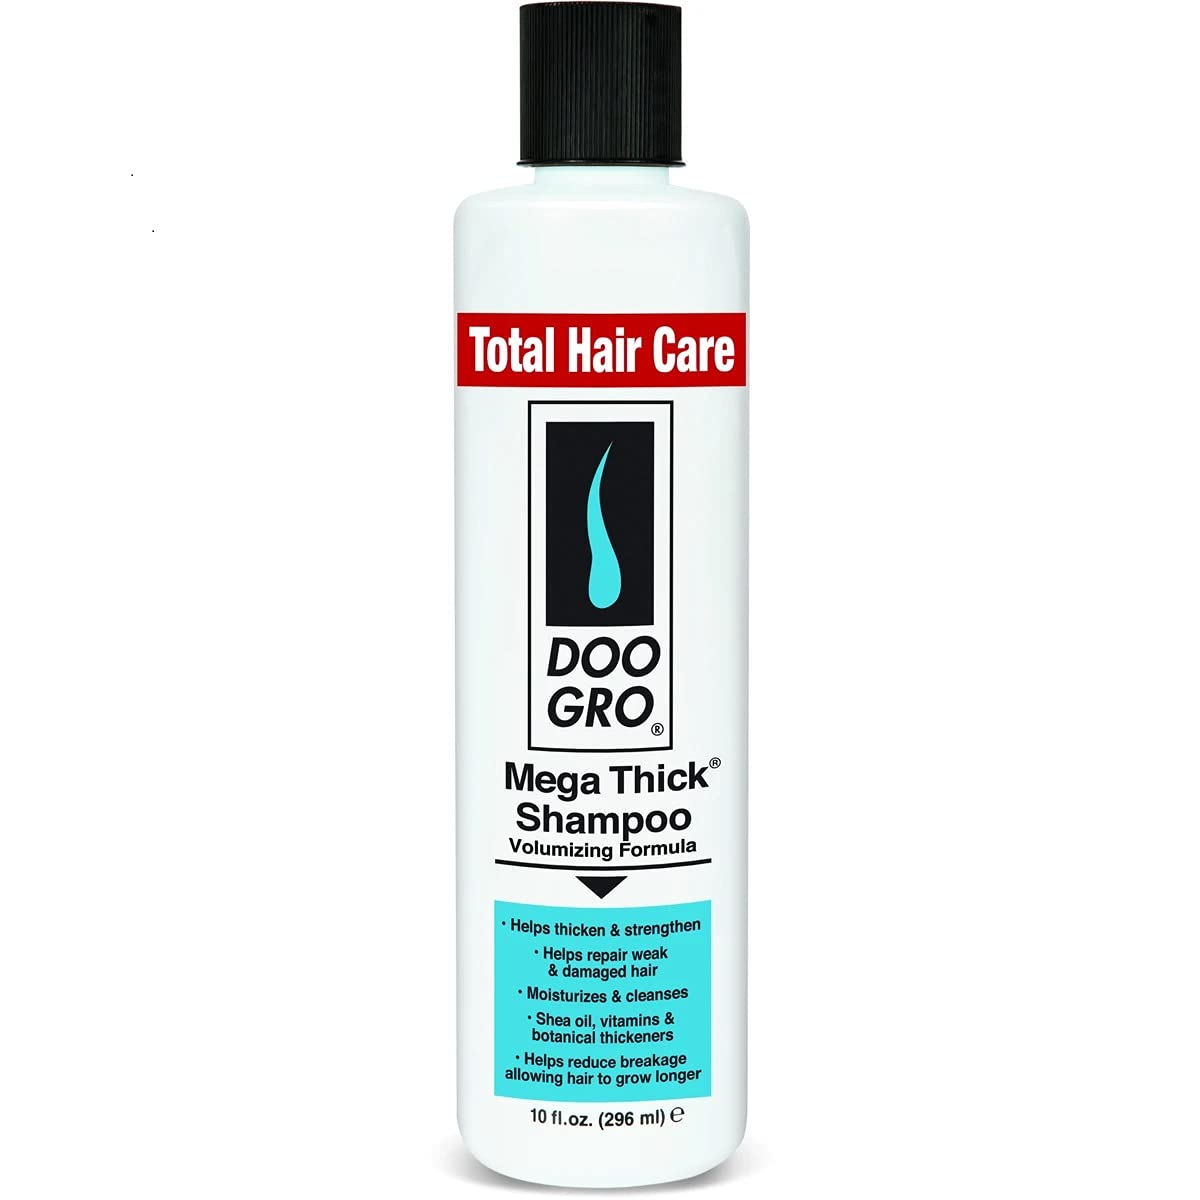 Doo Gro Mega Thick Shampoo Find Your New Look Today!